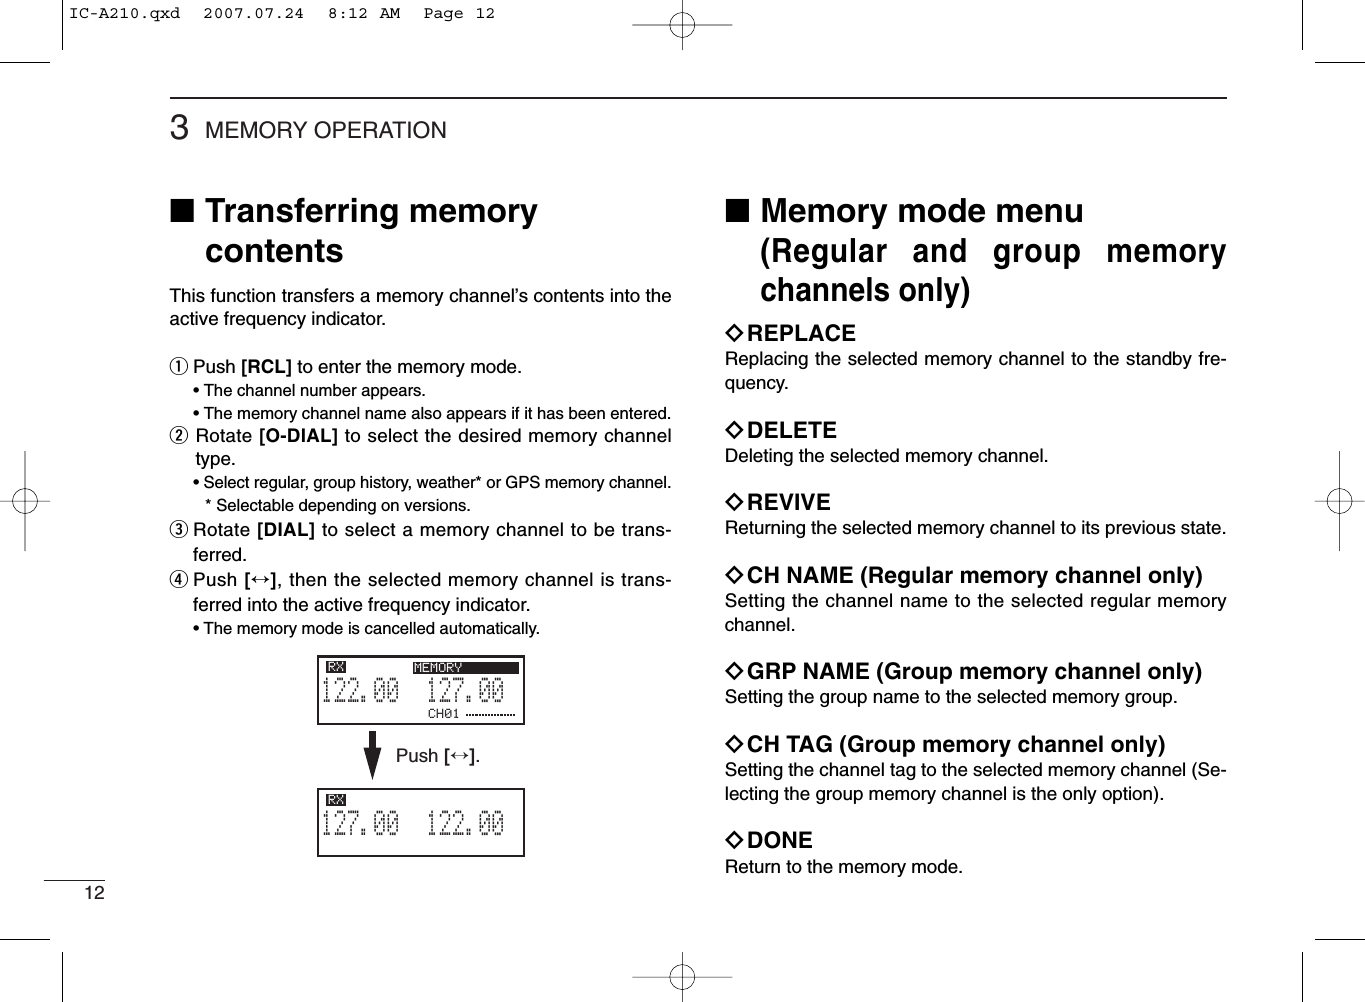 123MEMORY OPERATION■Transferring memorycontentsThis function transfers a memory channel’s contents into theactive frequency indicator.qPush [RCL] to enter the memory mode.• The channel number appears.• The memory channel name also appears if it has been entered.wRotate [O-DIAL] to select the desired memory channeltype.• Select regular, group history, weather* or GPS memory channel.* Selectable depending on versions.eRotate [DIAL] to select a memory channel to be trans-ferred.rPush [↔], then the selected memory channel is trans-ferred into the active frequency indicator.• The memory mode is cancelled automatically.■Memory mode menu(Regular and group memorychannels only)ïREPLACEReplacing the selected memory channel to the standby fre-quency.ïDELETEDeleting the selected memory channel.ïREVIVEReturning the selected memory channel to its previous state.ïCH NAME (Regular memory channel only)Setting the channel name to the selected regular memorychannel.ïGRP NAME (Group memory channel only)Setting the group name to the selected memory group.ïCH TAG (Group memory channel only)Setting the channel tag to the selected memory channel (Se-lecting the group memory channel is the only option).ïDONEReturn to the memory mode.CH01127.005122.00RX MEMORY122.005127.00RX MEMORYPush [↔].IC-A210.qxd  2007.07.24  8:12 AM  Page 12